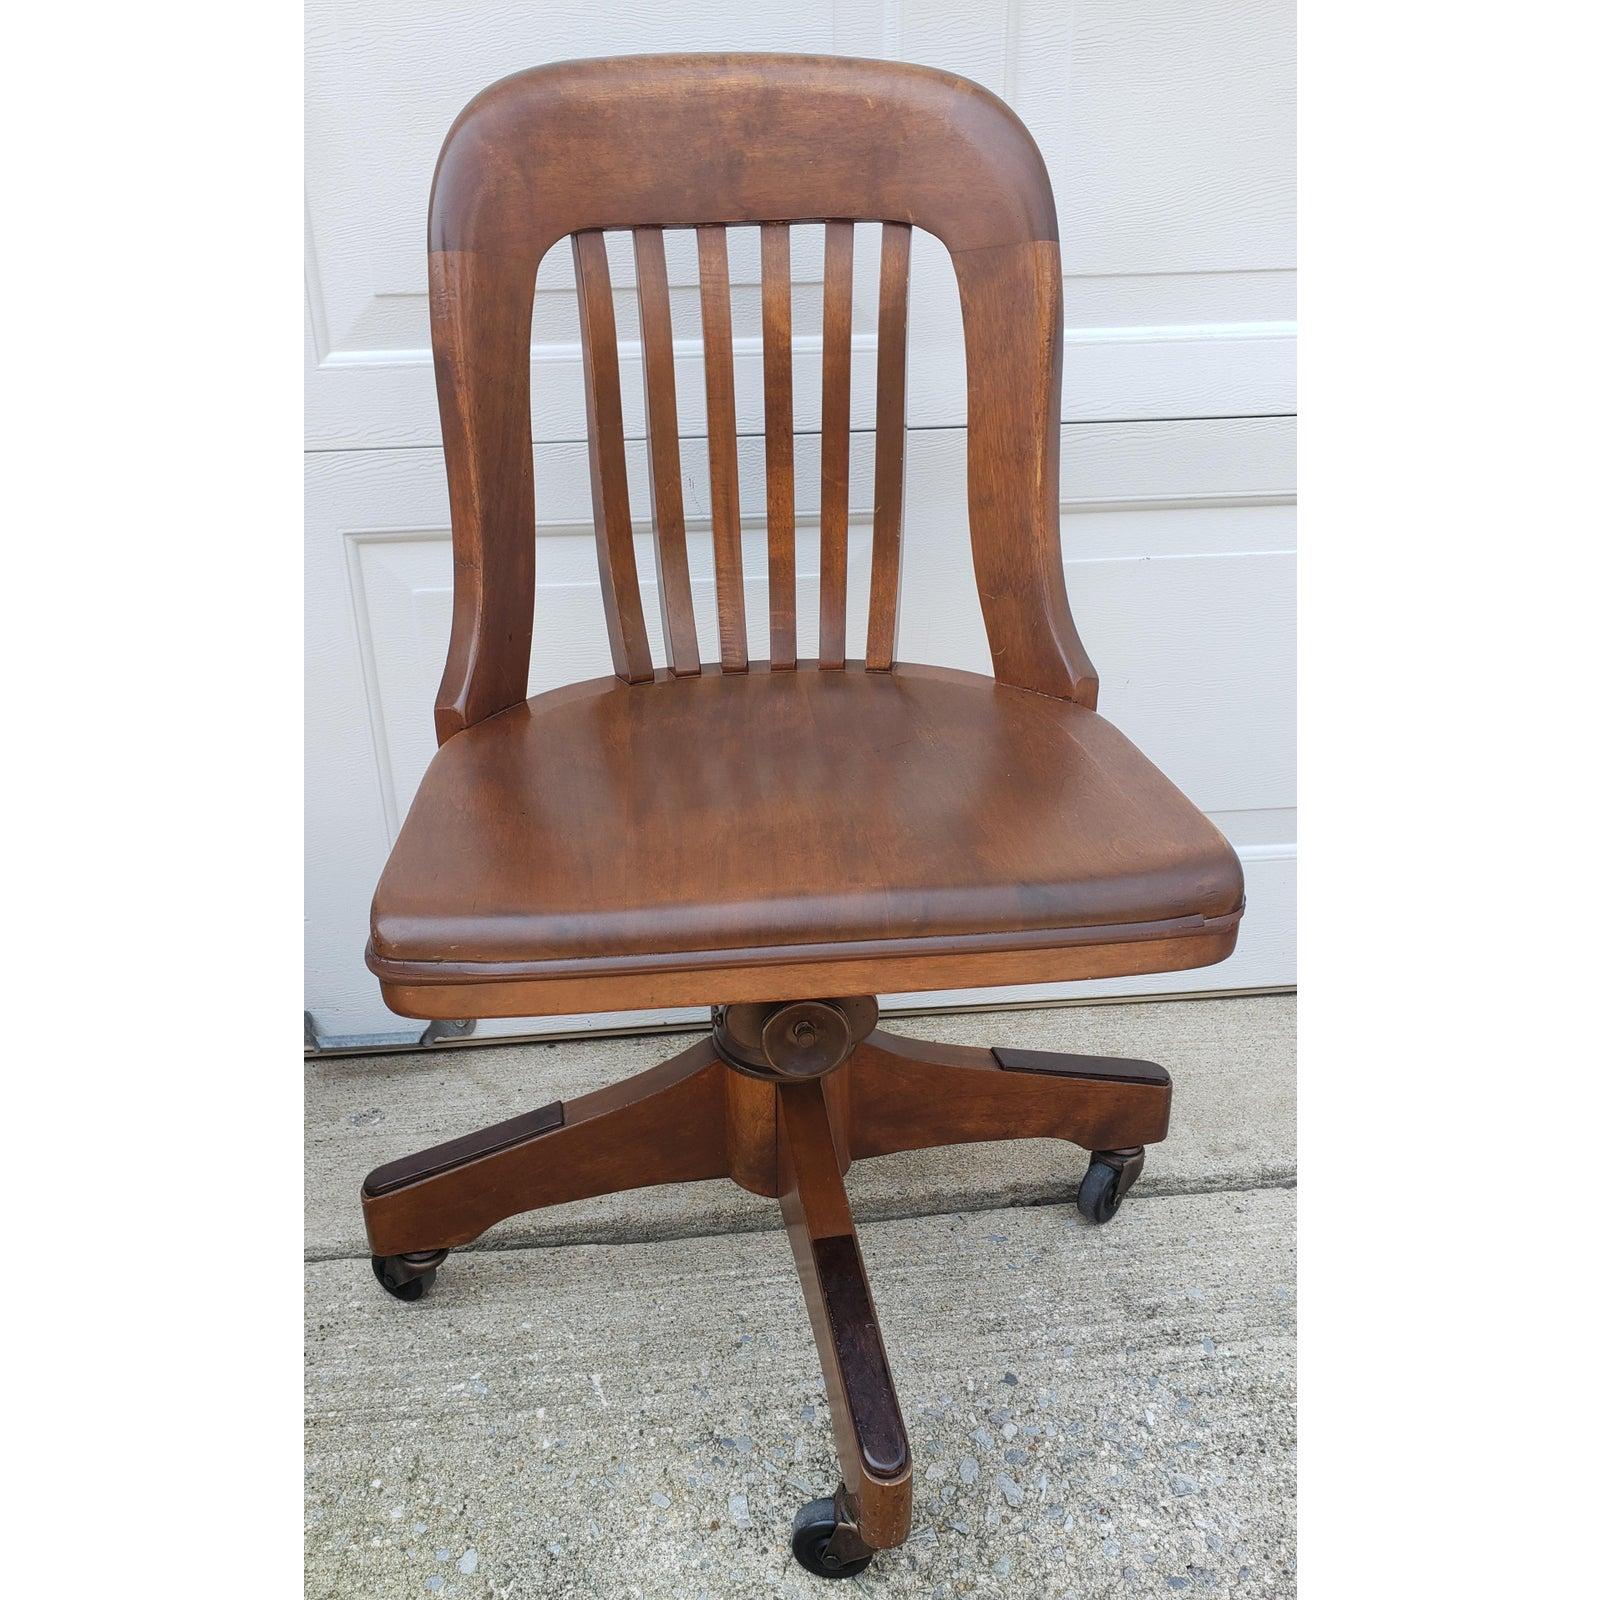 Late 19th Century The Taylor Chair Co. Antique Oak Bankers Chair